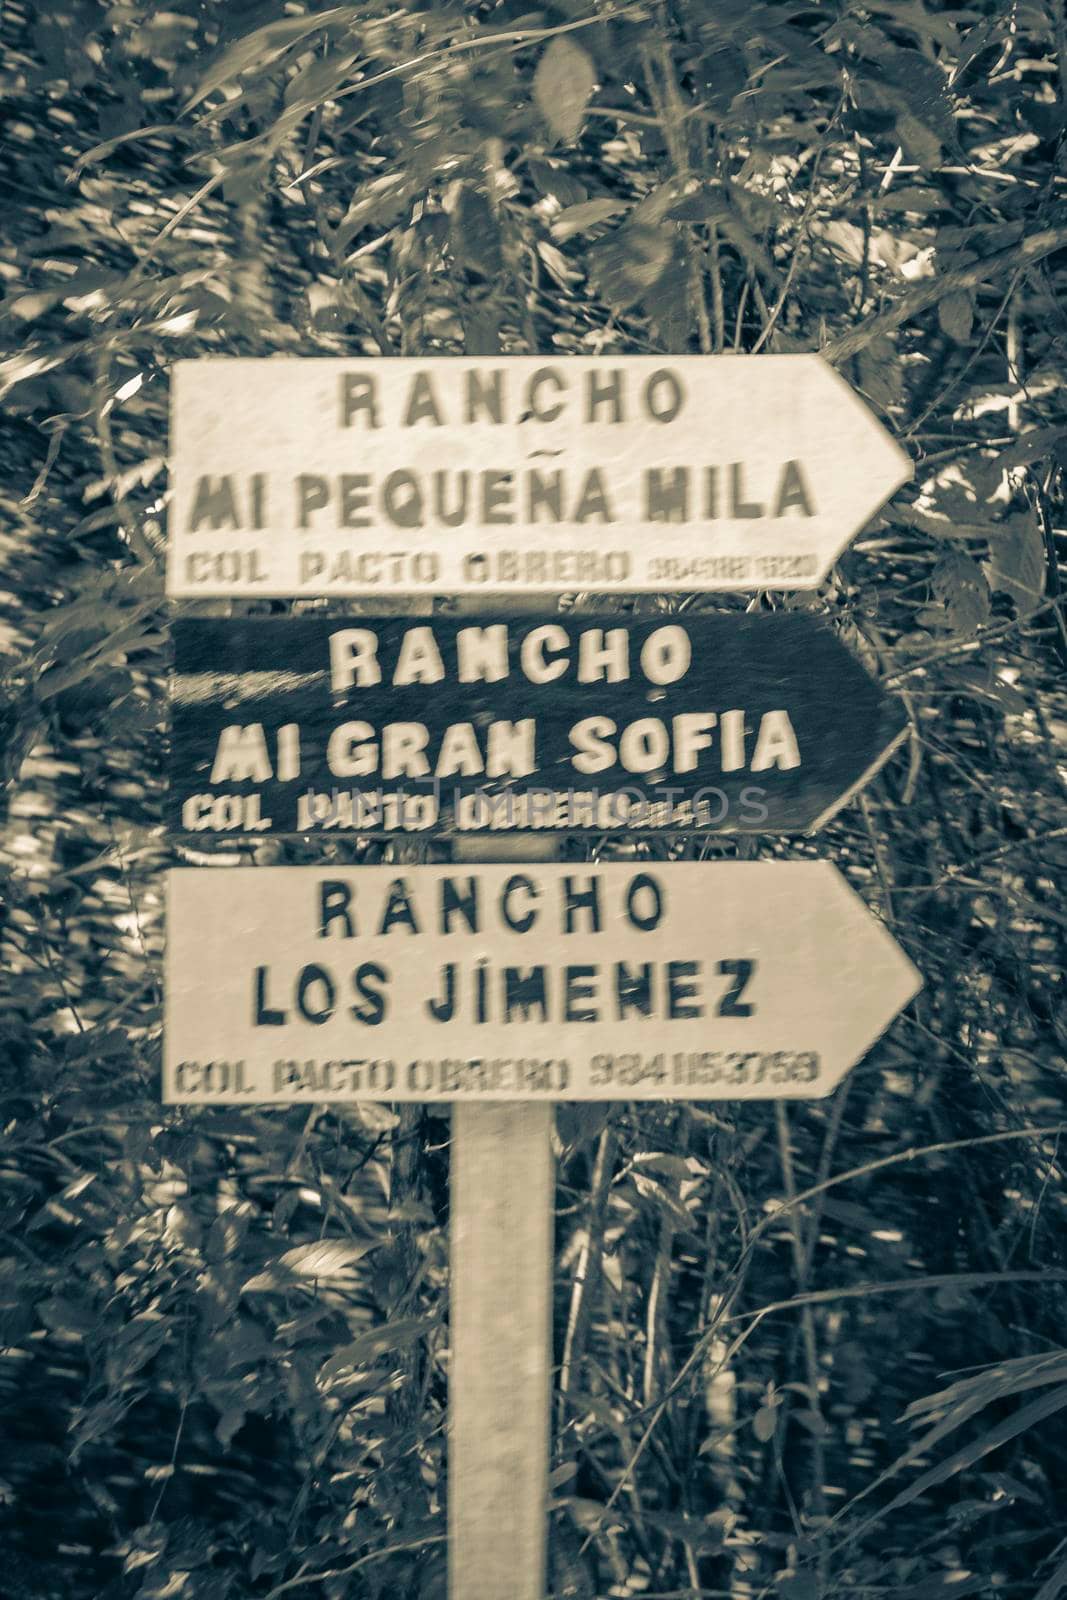 Muyil Mexico 04. February 2022 Old black and white picture of Information entrance walking trails and welcome sing board with arrow to ranches and farms in Puerto Aventuras Quintana Roo Mexico.